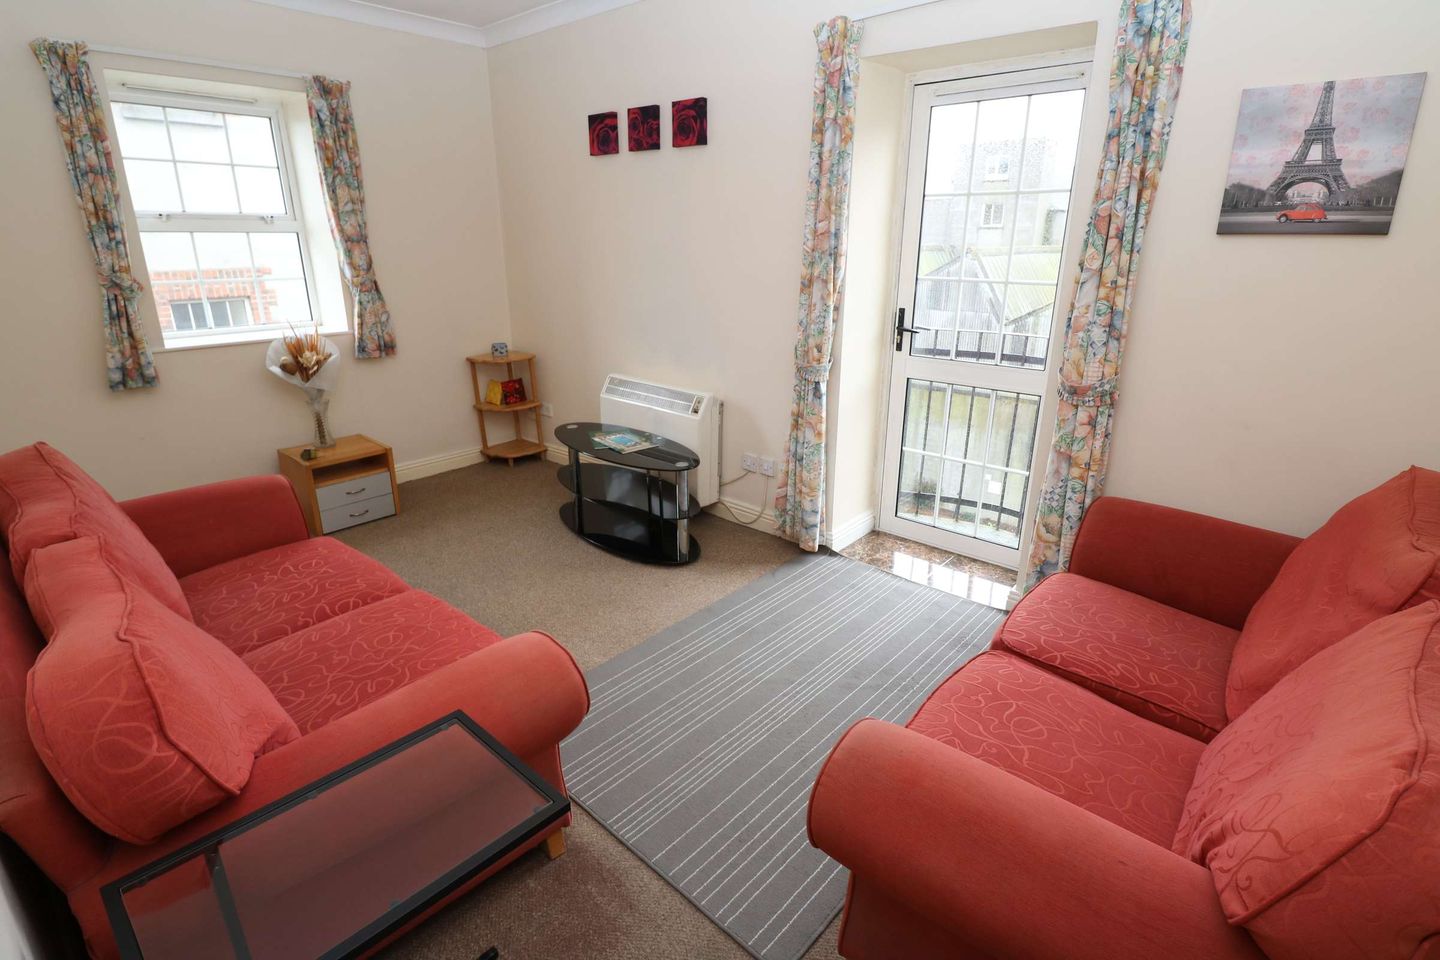 Apartment 11, Block B, Kermon House, The Mall, Drogheda, Co. Louth, A92VE84